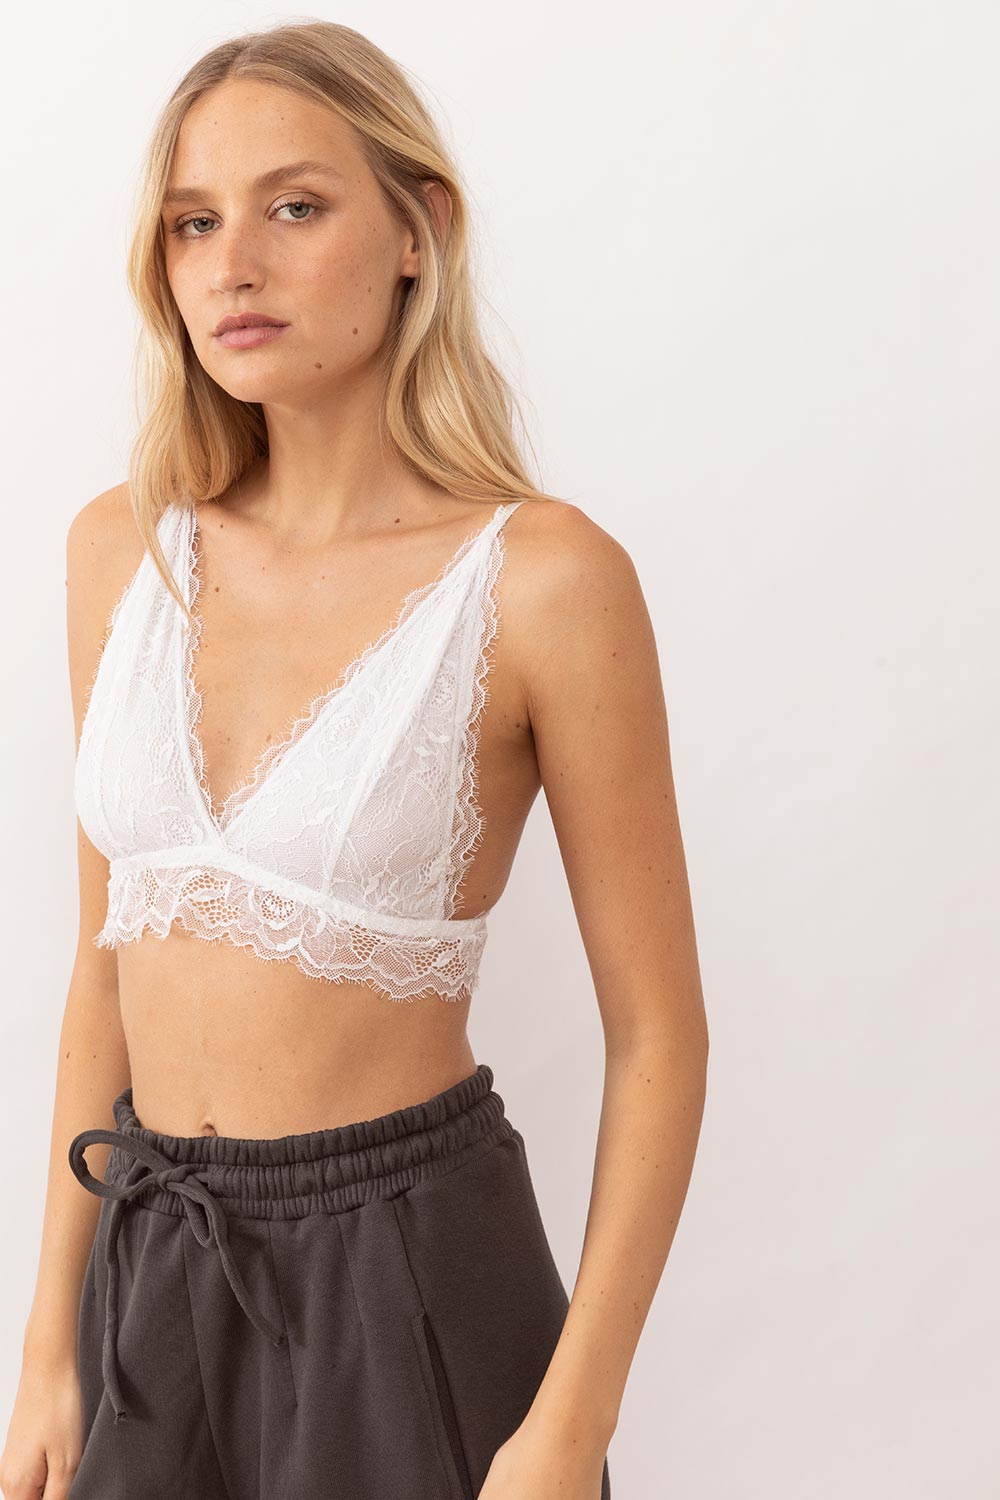 Uly White Lace Top